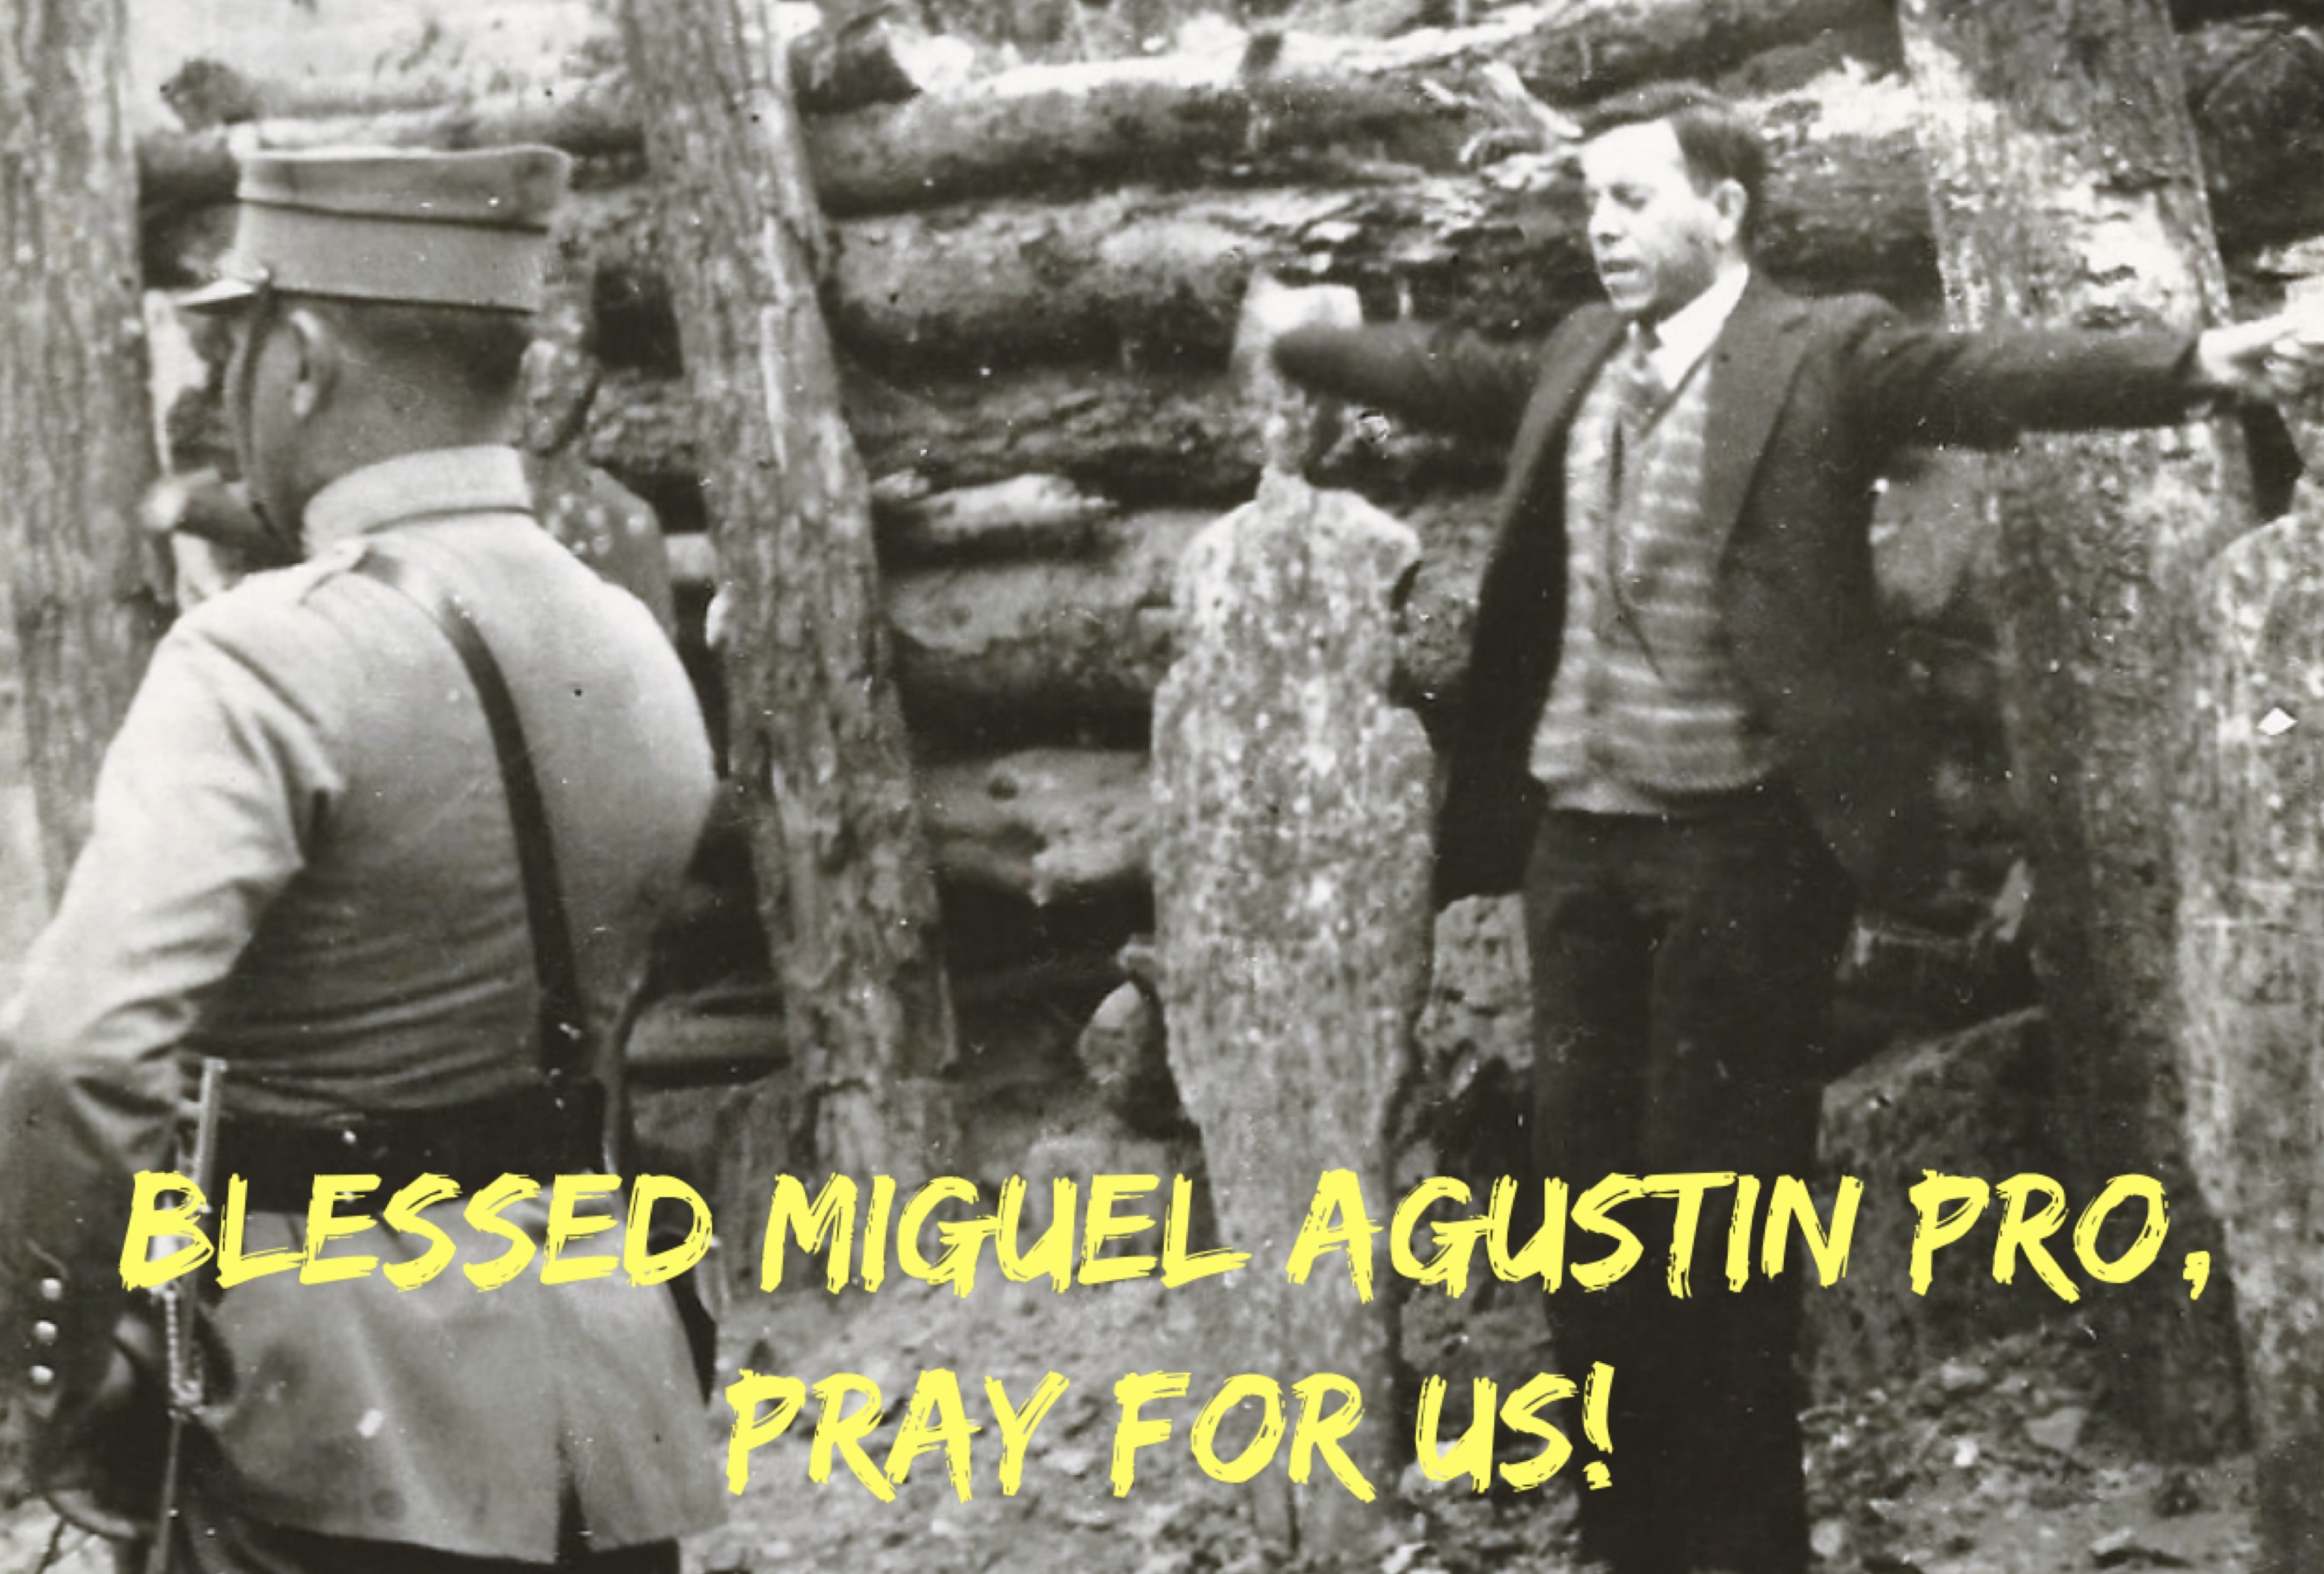 23rd November – Blessed Miguel Agustin Pro